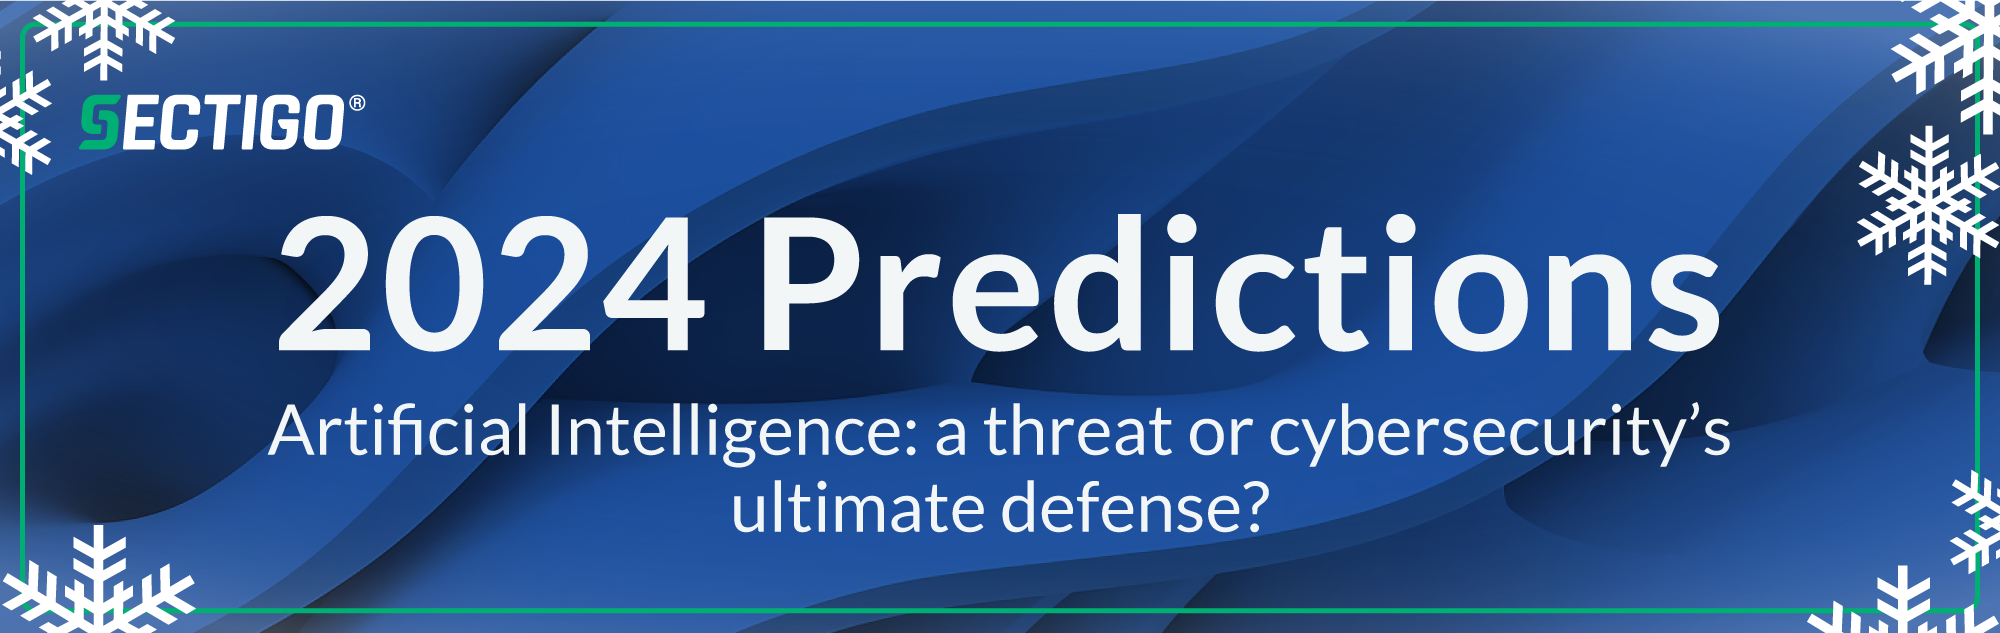 Prediction: AI - a threat actor or cybersecurity's ultimate defense?